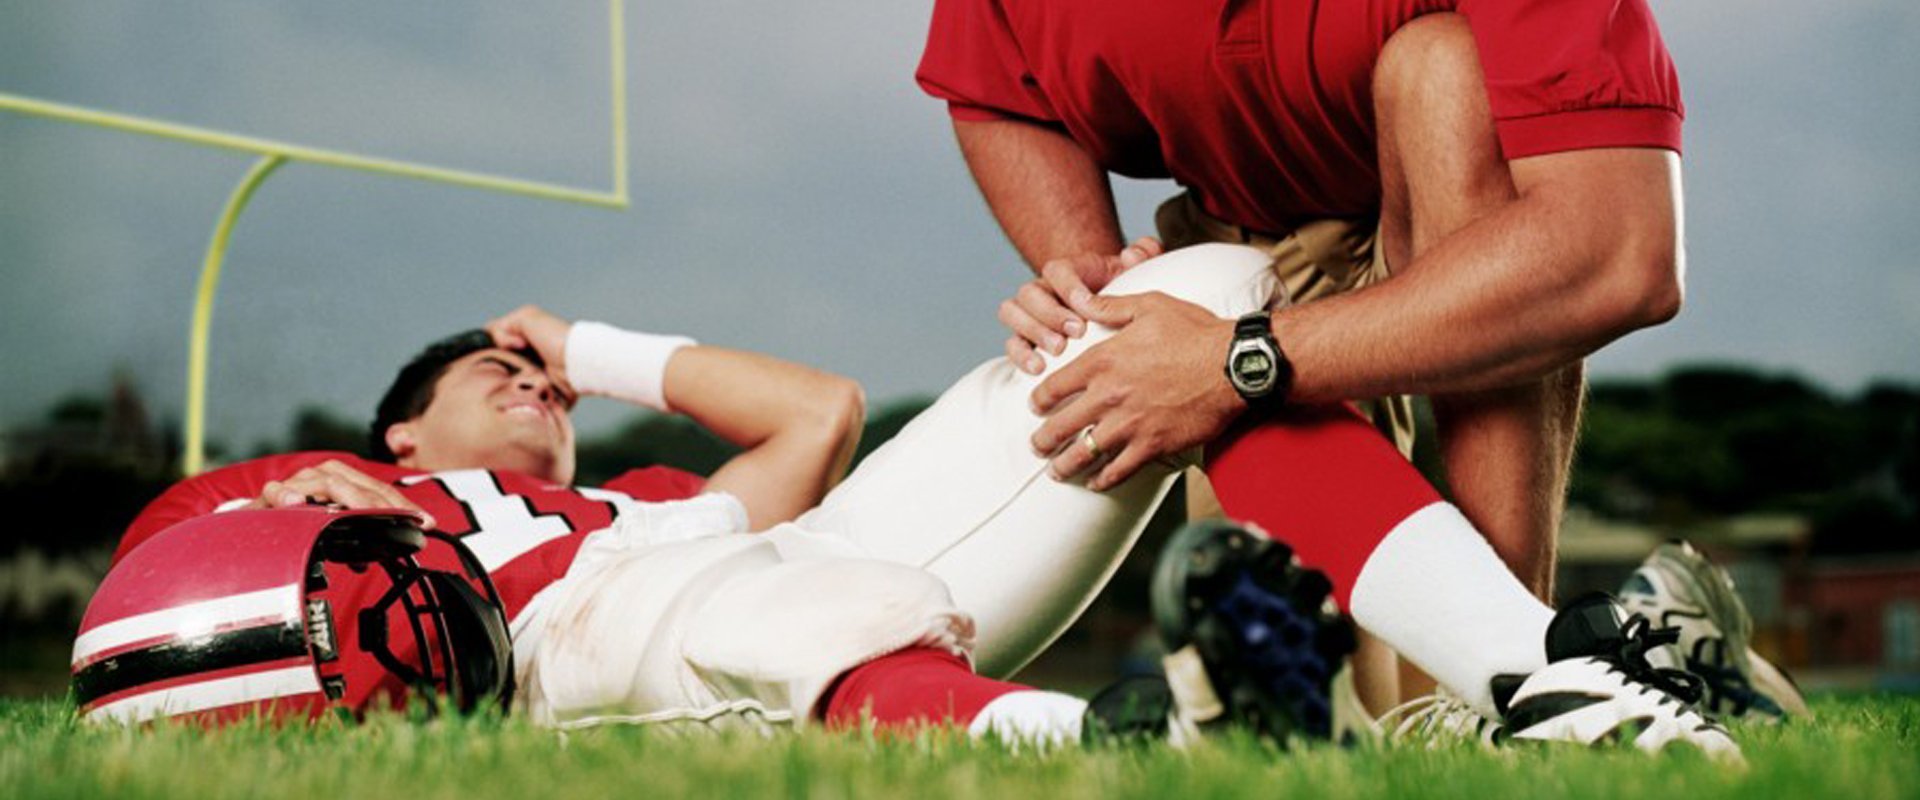 DO NOT NEGLECT SPORT INJURIES